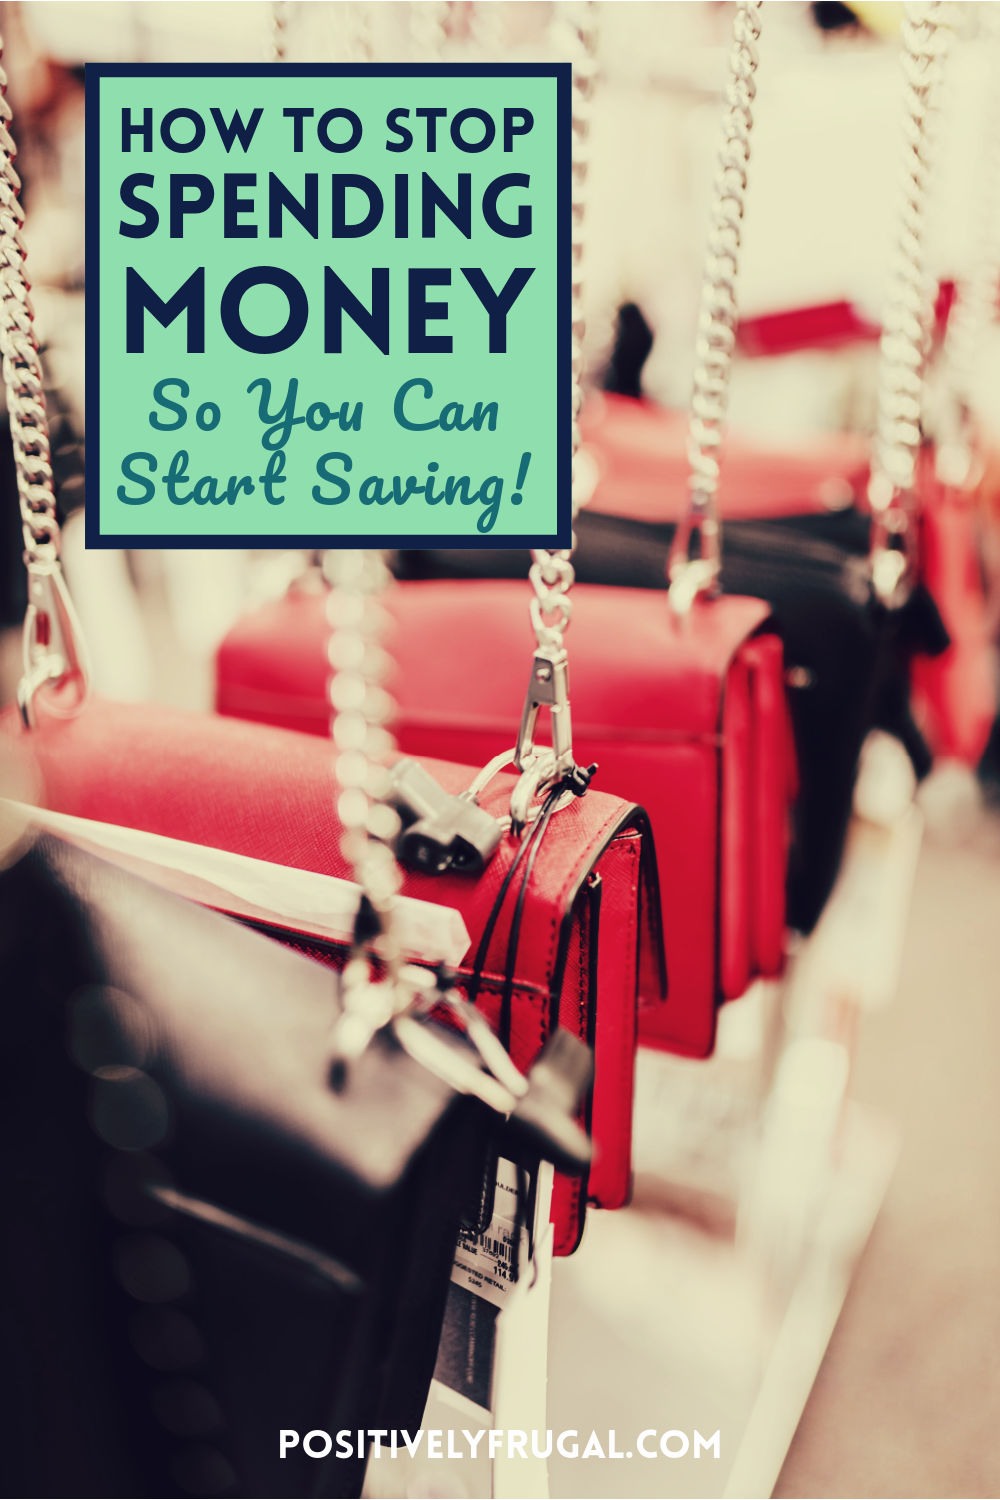 How To Stop Spending Money So You Can Start Saving by PositivelyFrugal.com